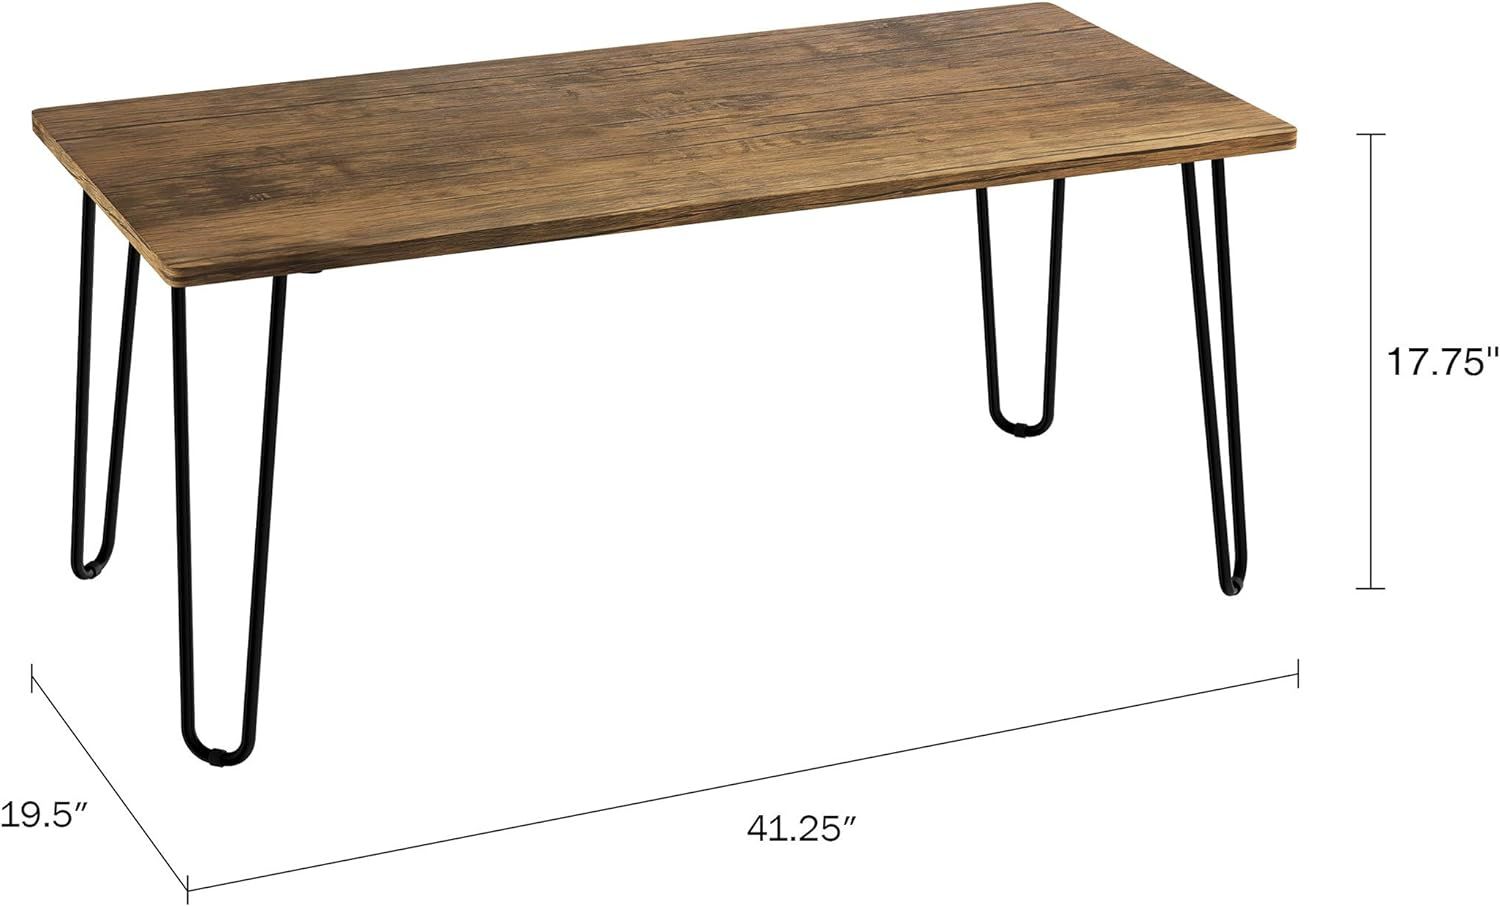 Lavish Home Coffee Table with Hairpin Legs, (L) 41.25” x (W) 19.5” x (H) 17.75”, Brown | Amazon (US)